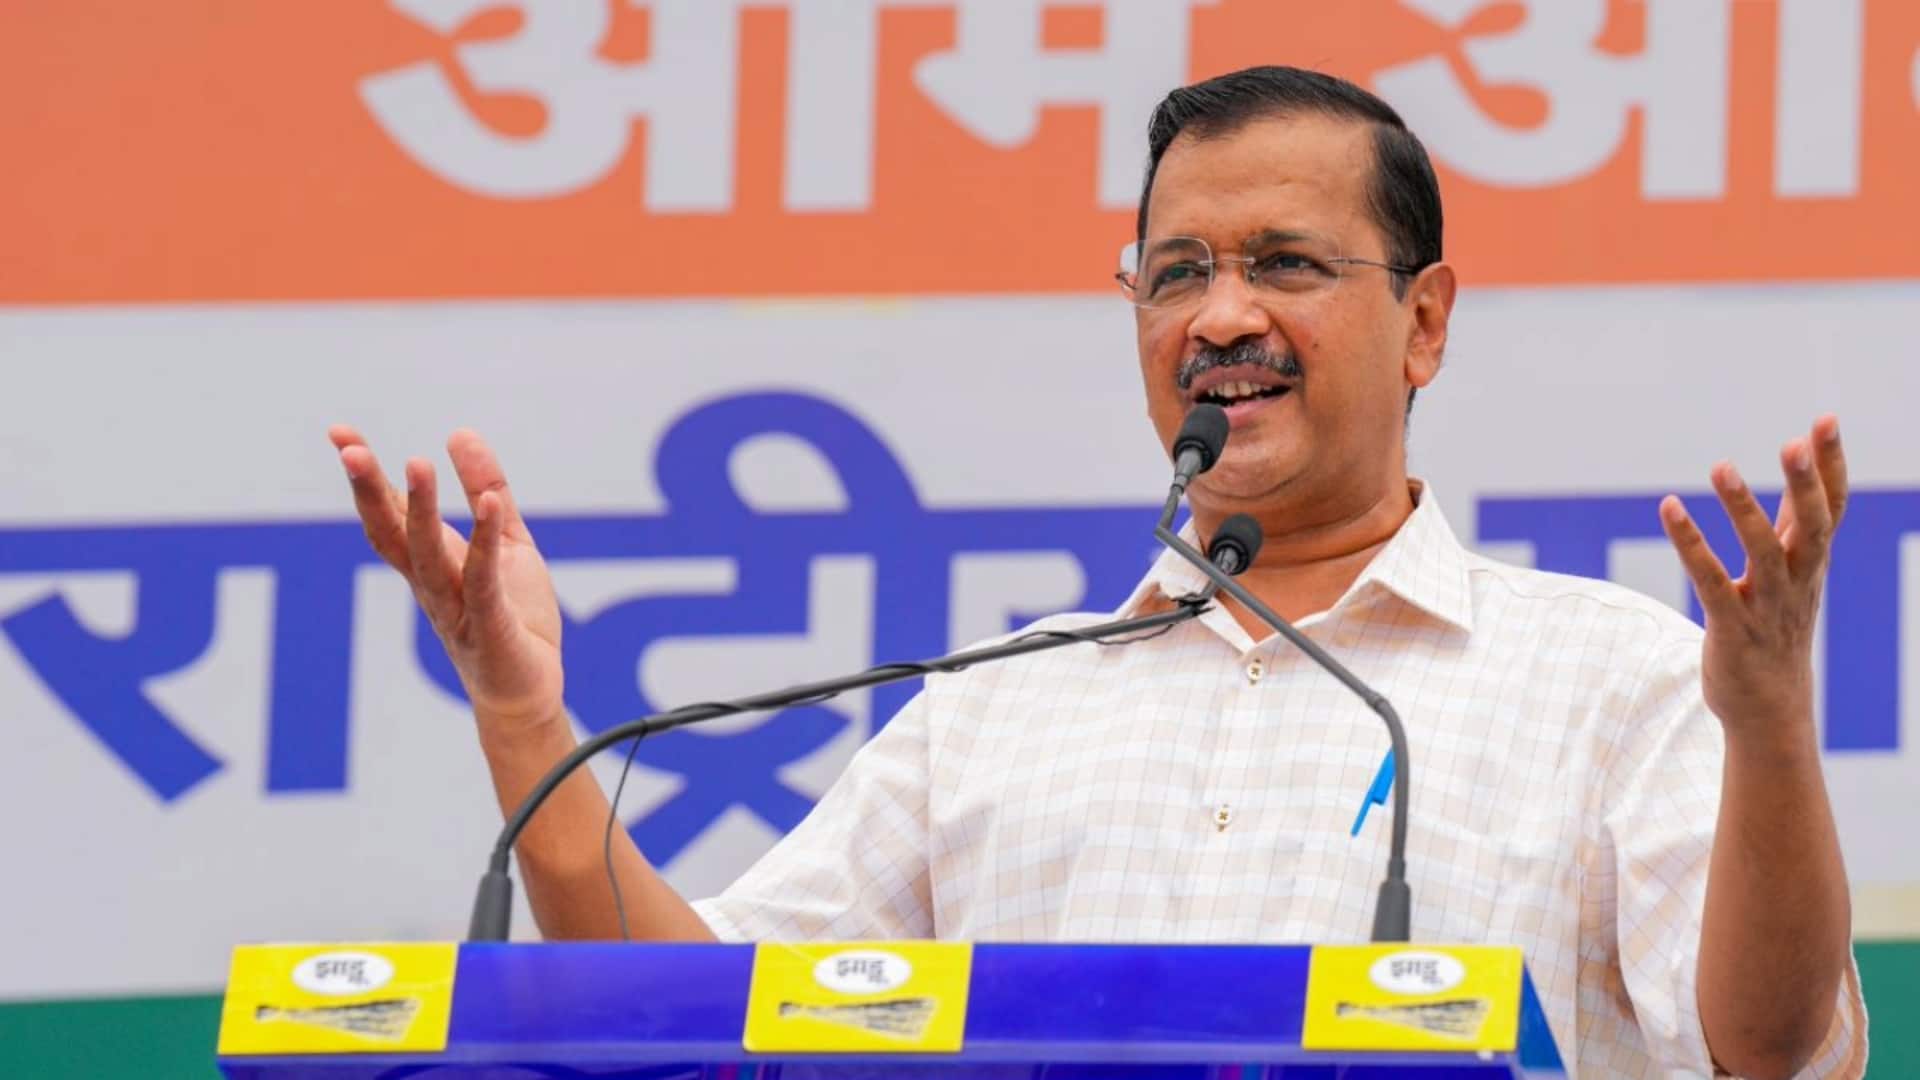 'Coming to BJP office tomorrow': Kejriwal after aide's arrest 